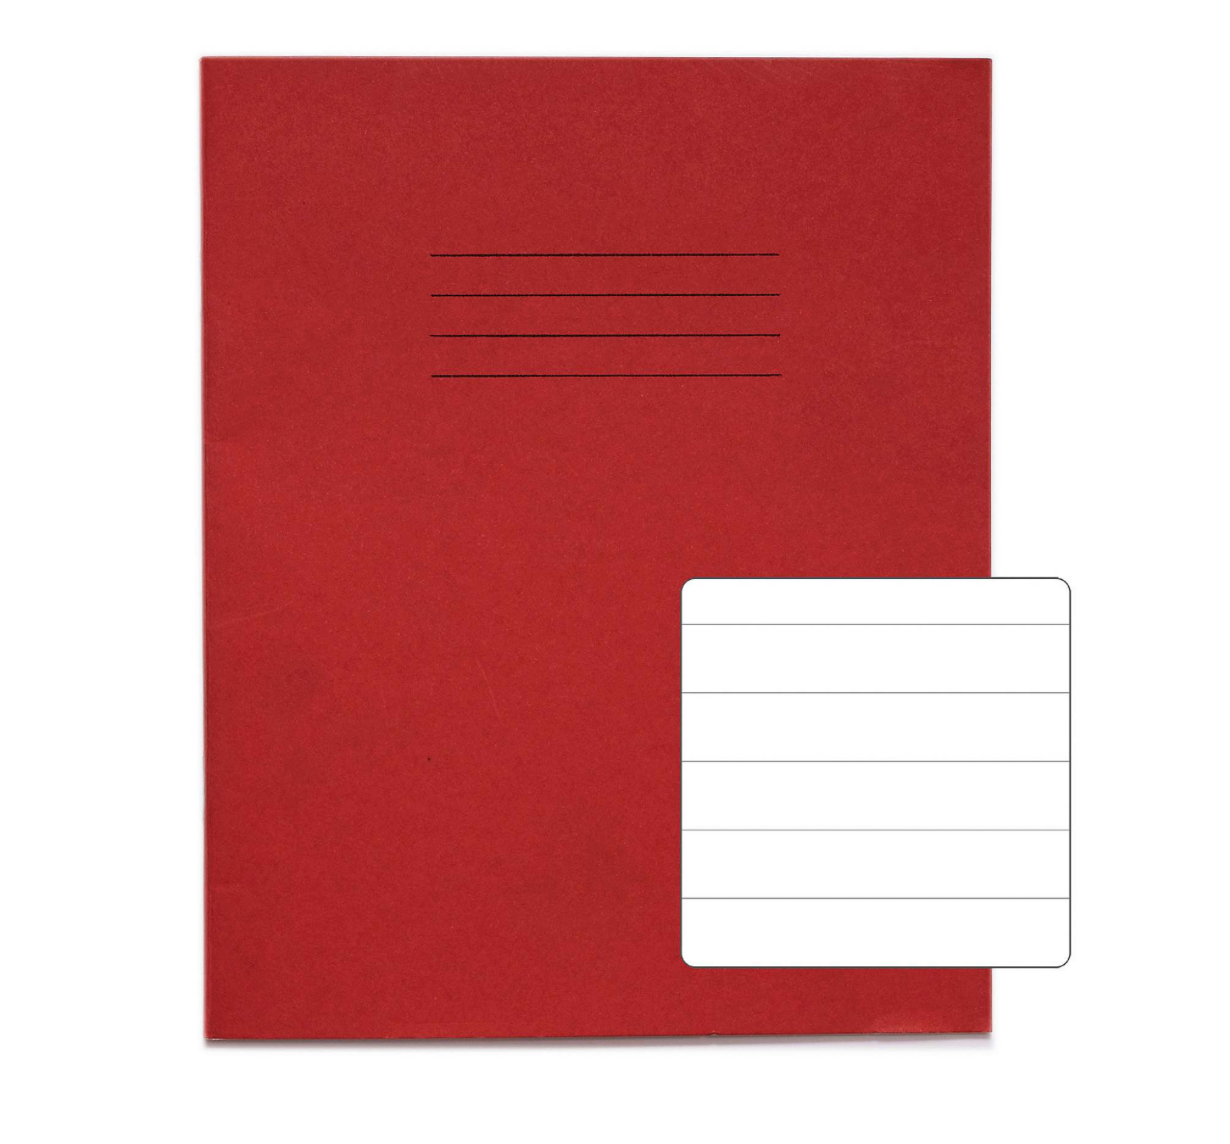 RHINO 8 x 6.5 Exercise Book 40 Page Red 15mm Lined Pack of 10